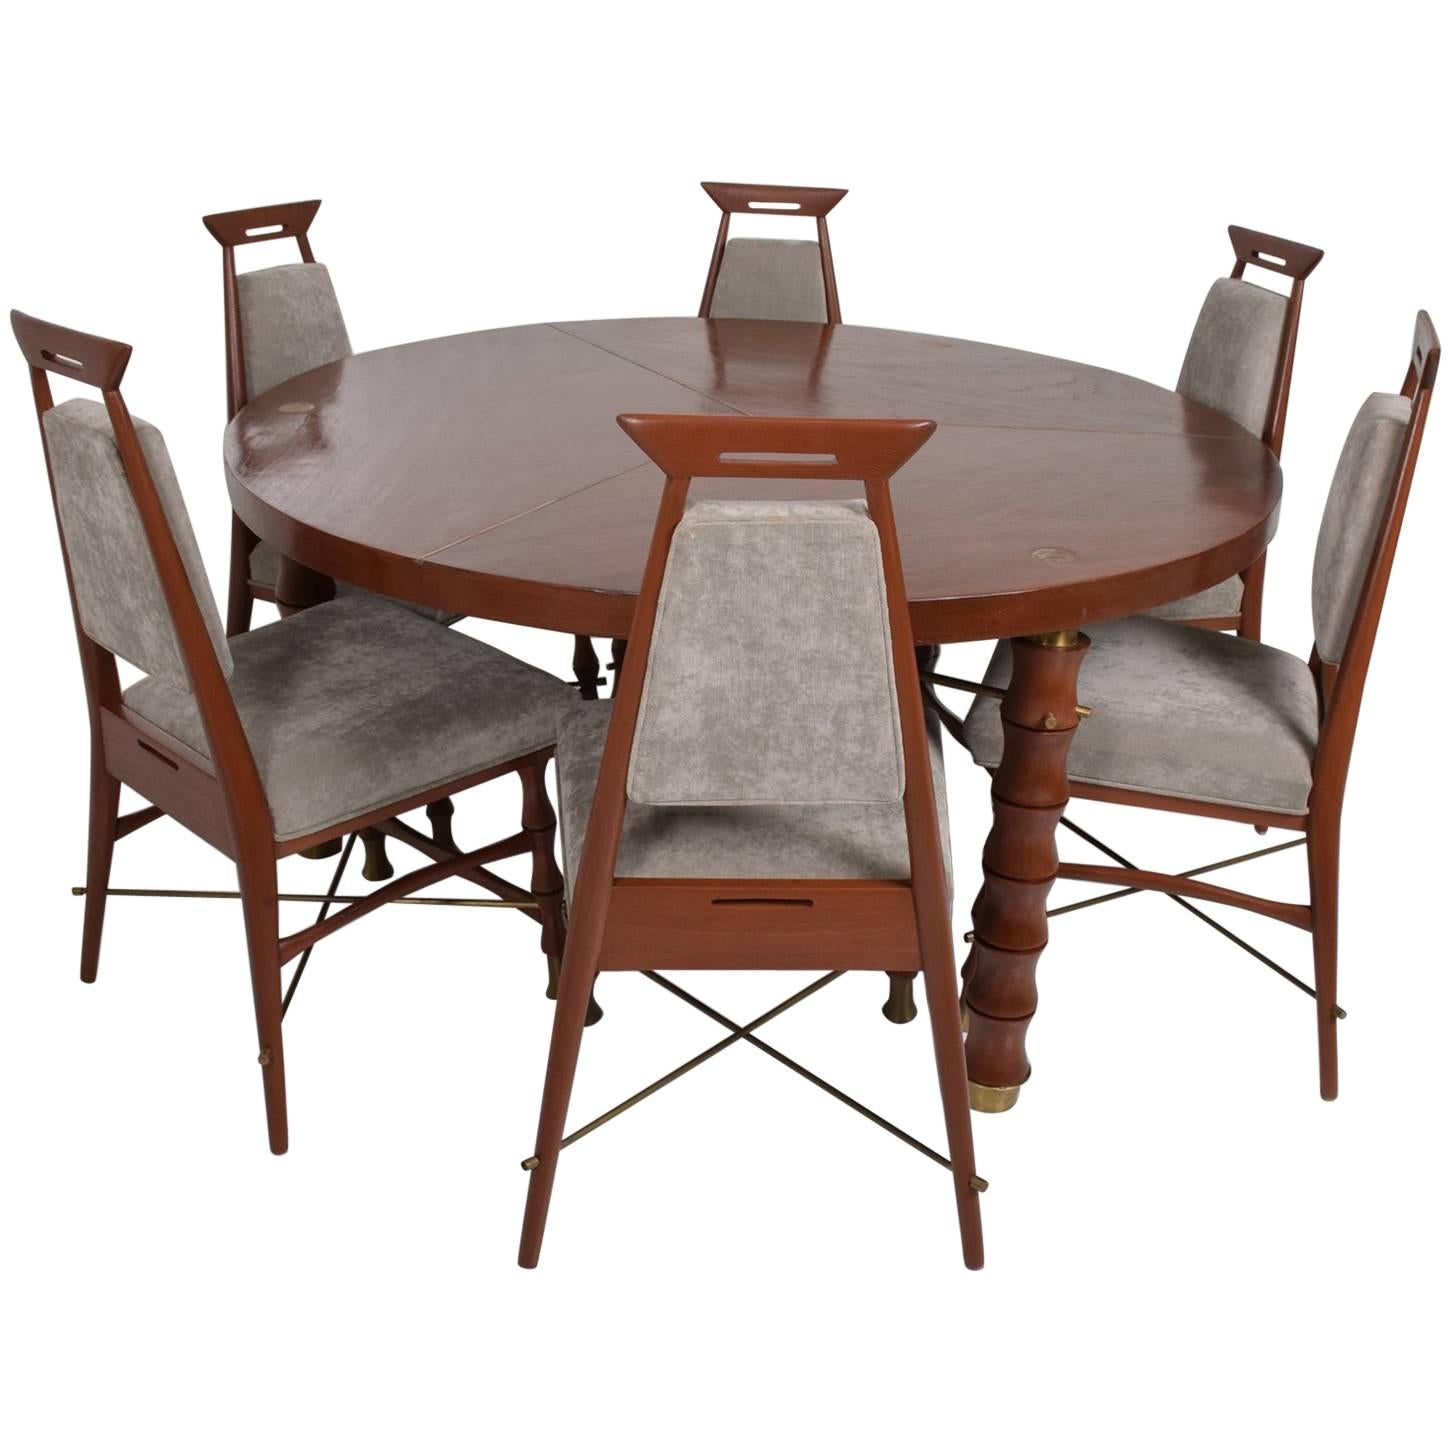 Mexican Modernist Dining Table after Frank Kyle